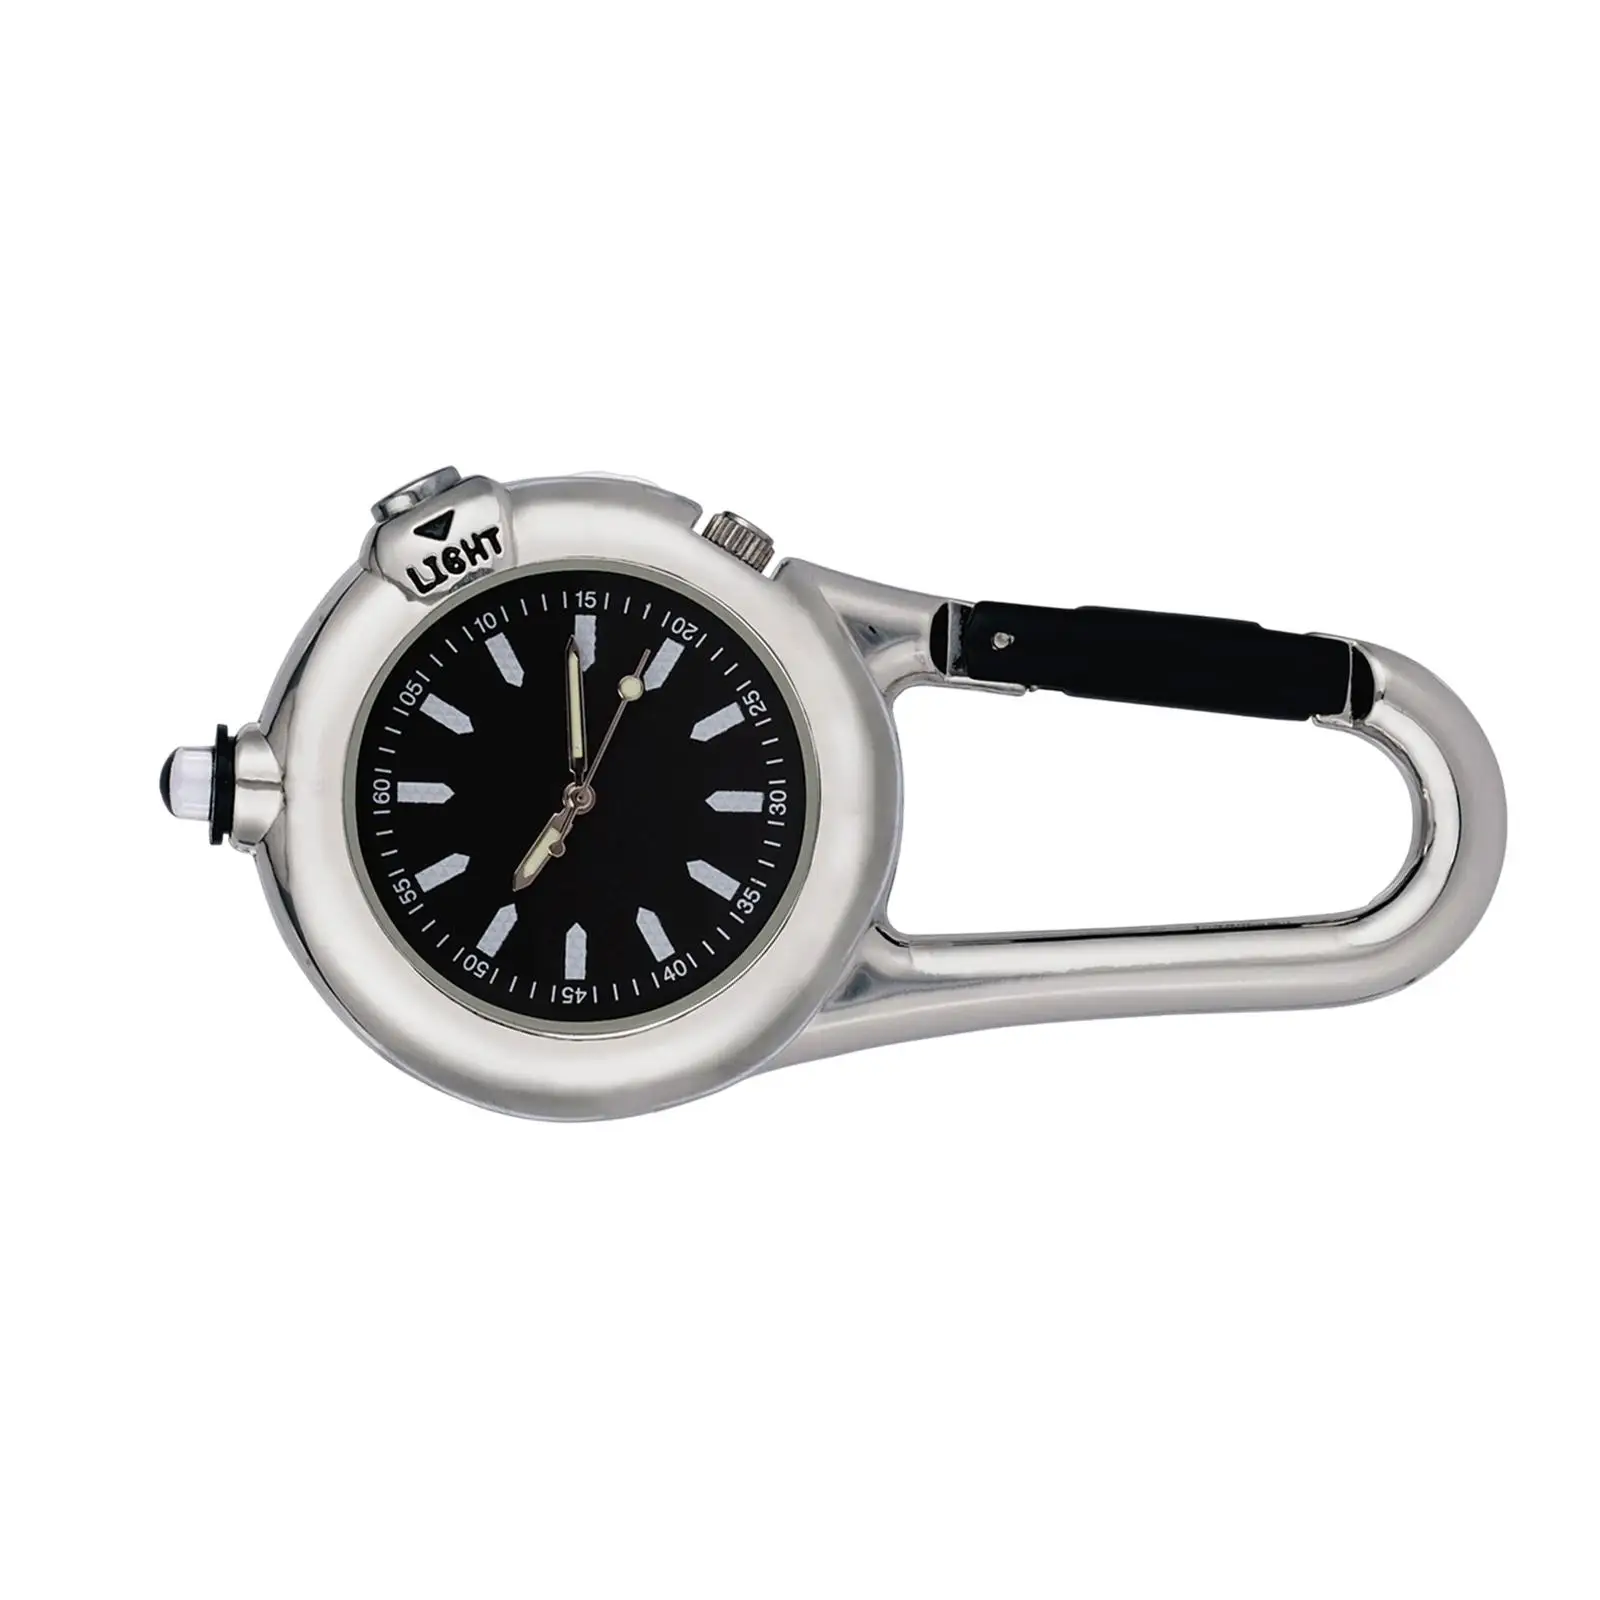 Portable Carabiner Pocket Watch Backpack Watch Unisex Climbing Watch for Outdoor Activities Hiking Camping Equipment